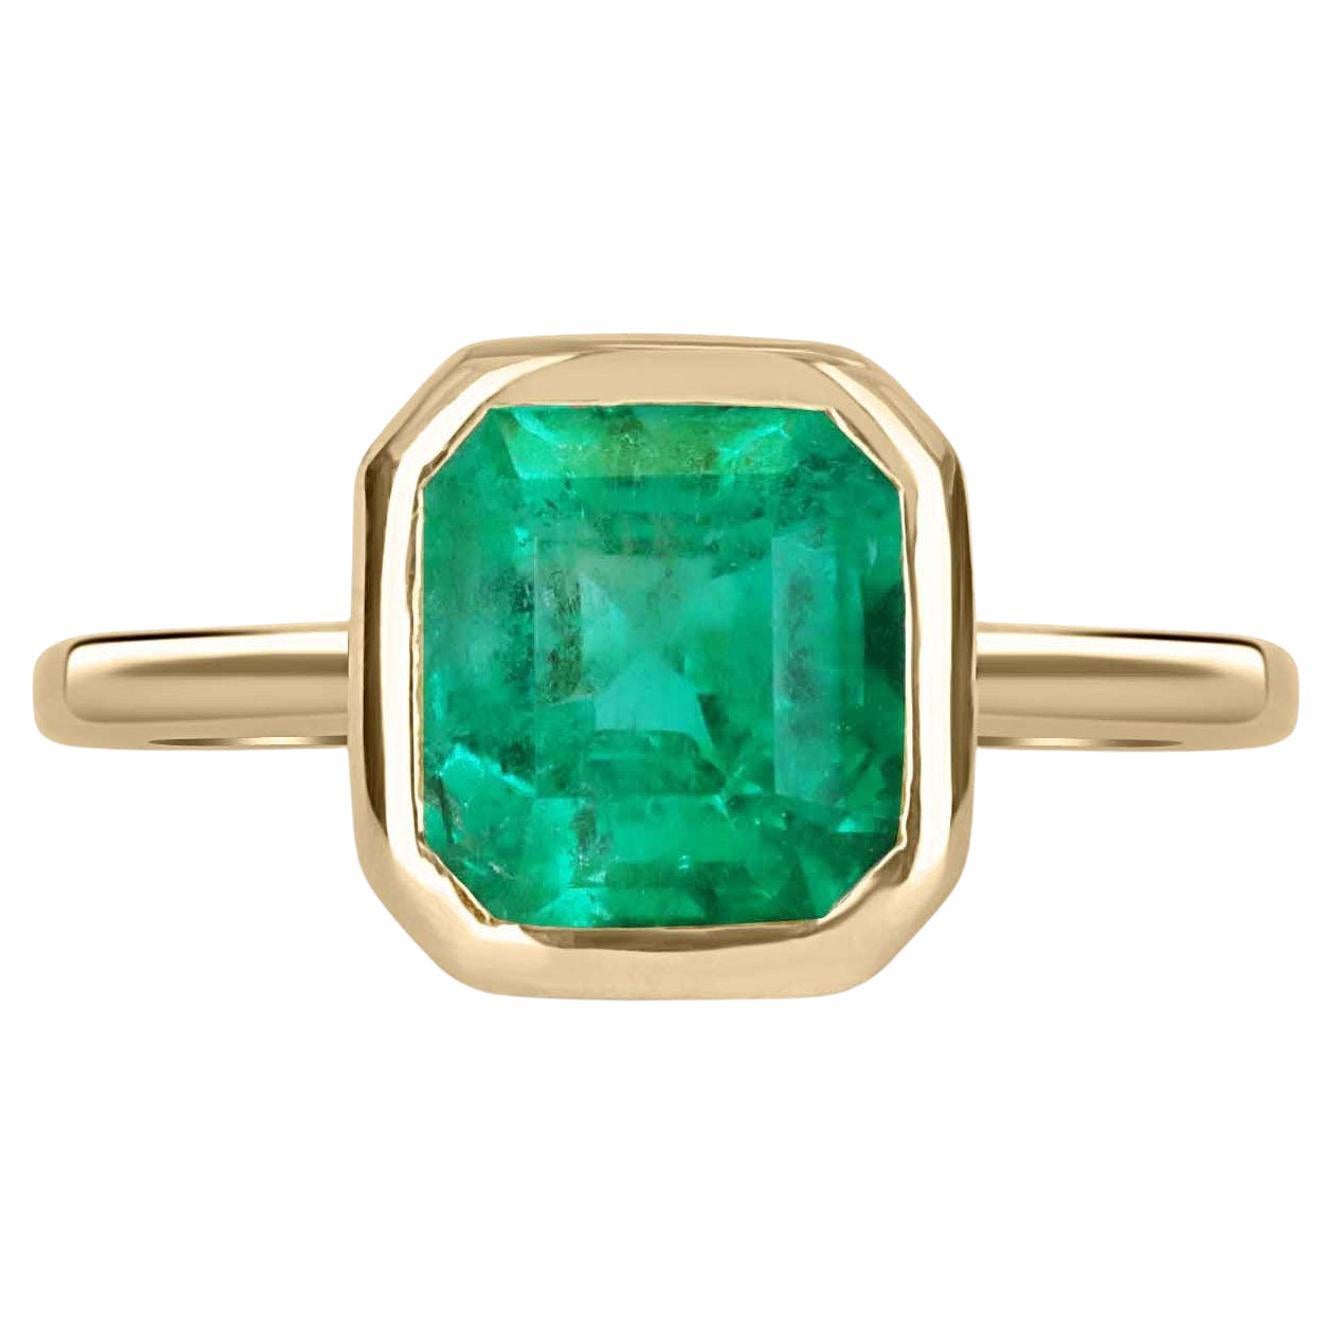 2.65cts 18K Bezel Set Colombian Emerald -Emerald Cut Solitaire Ring For Sale